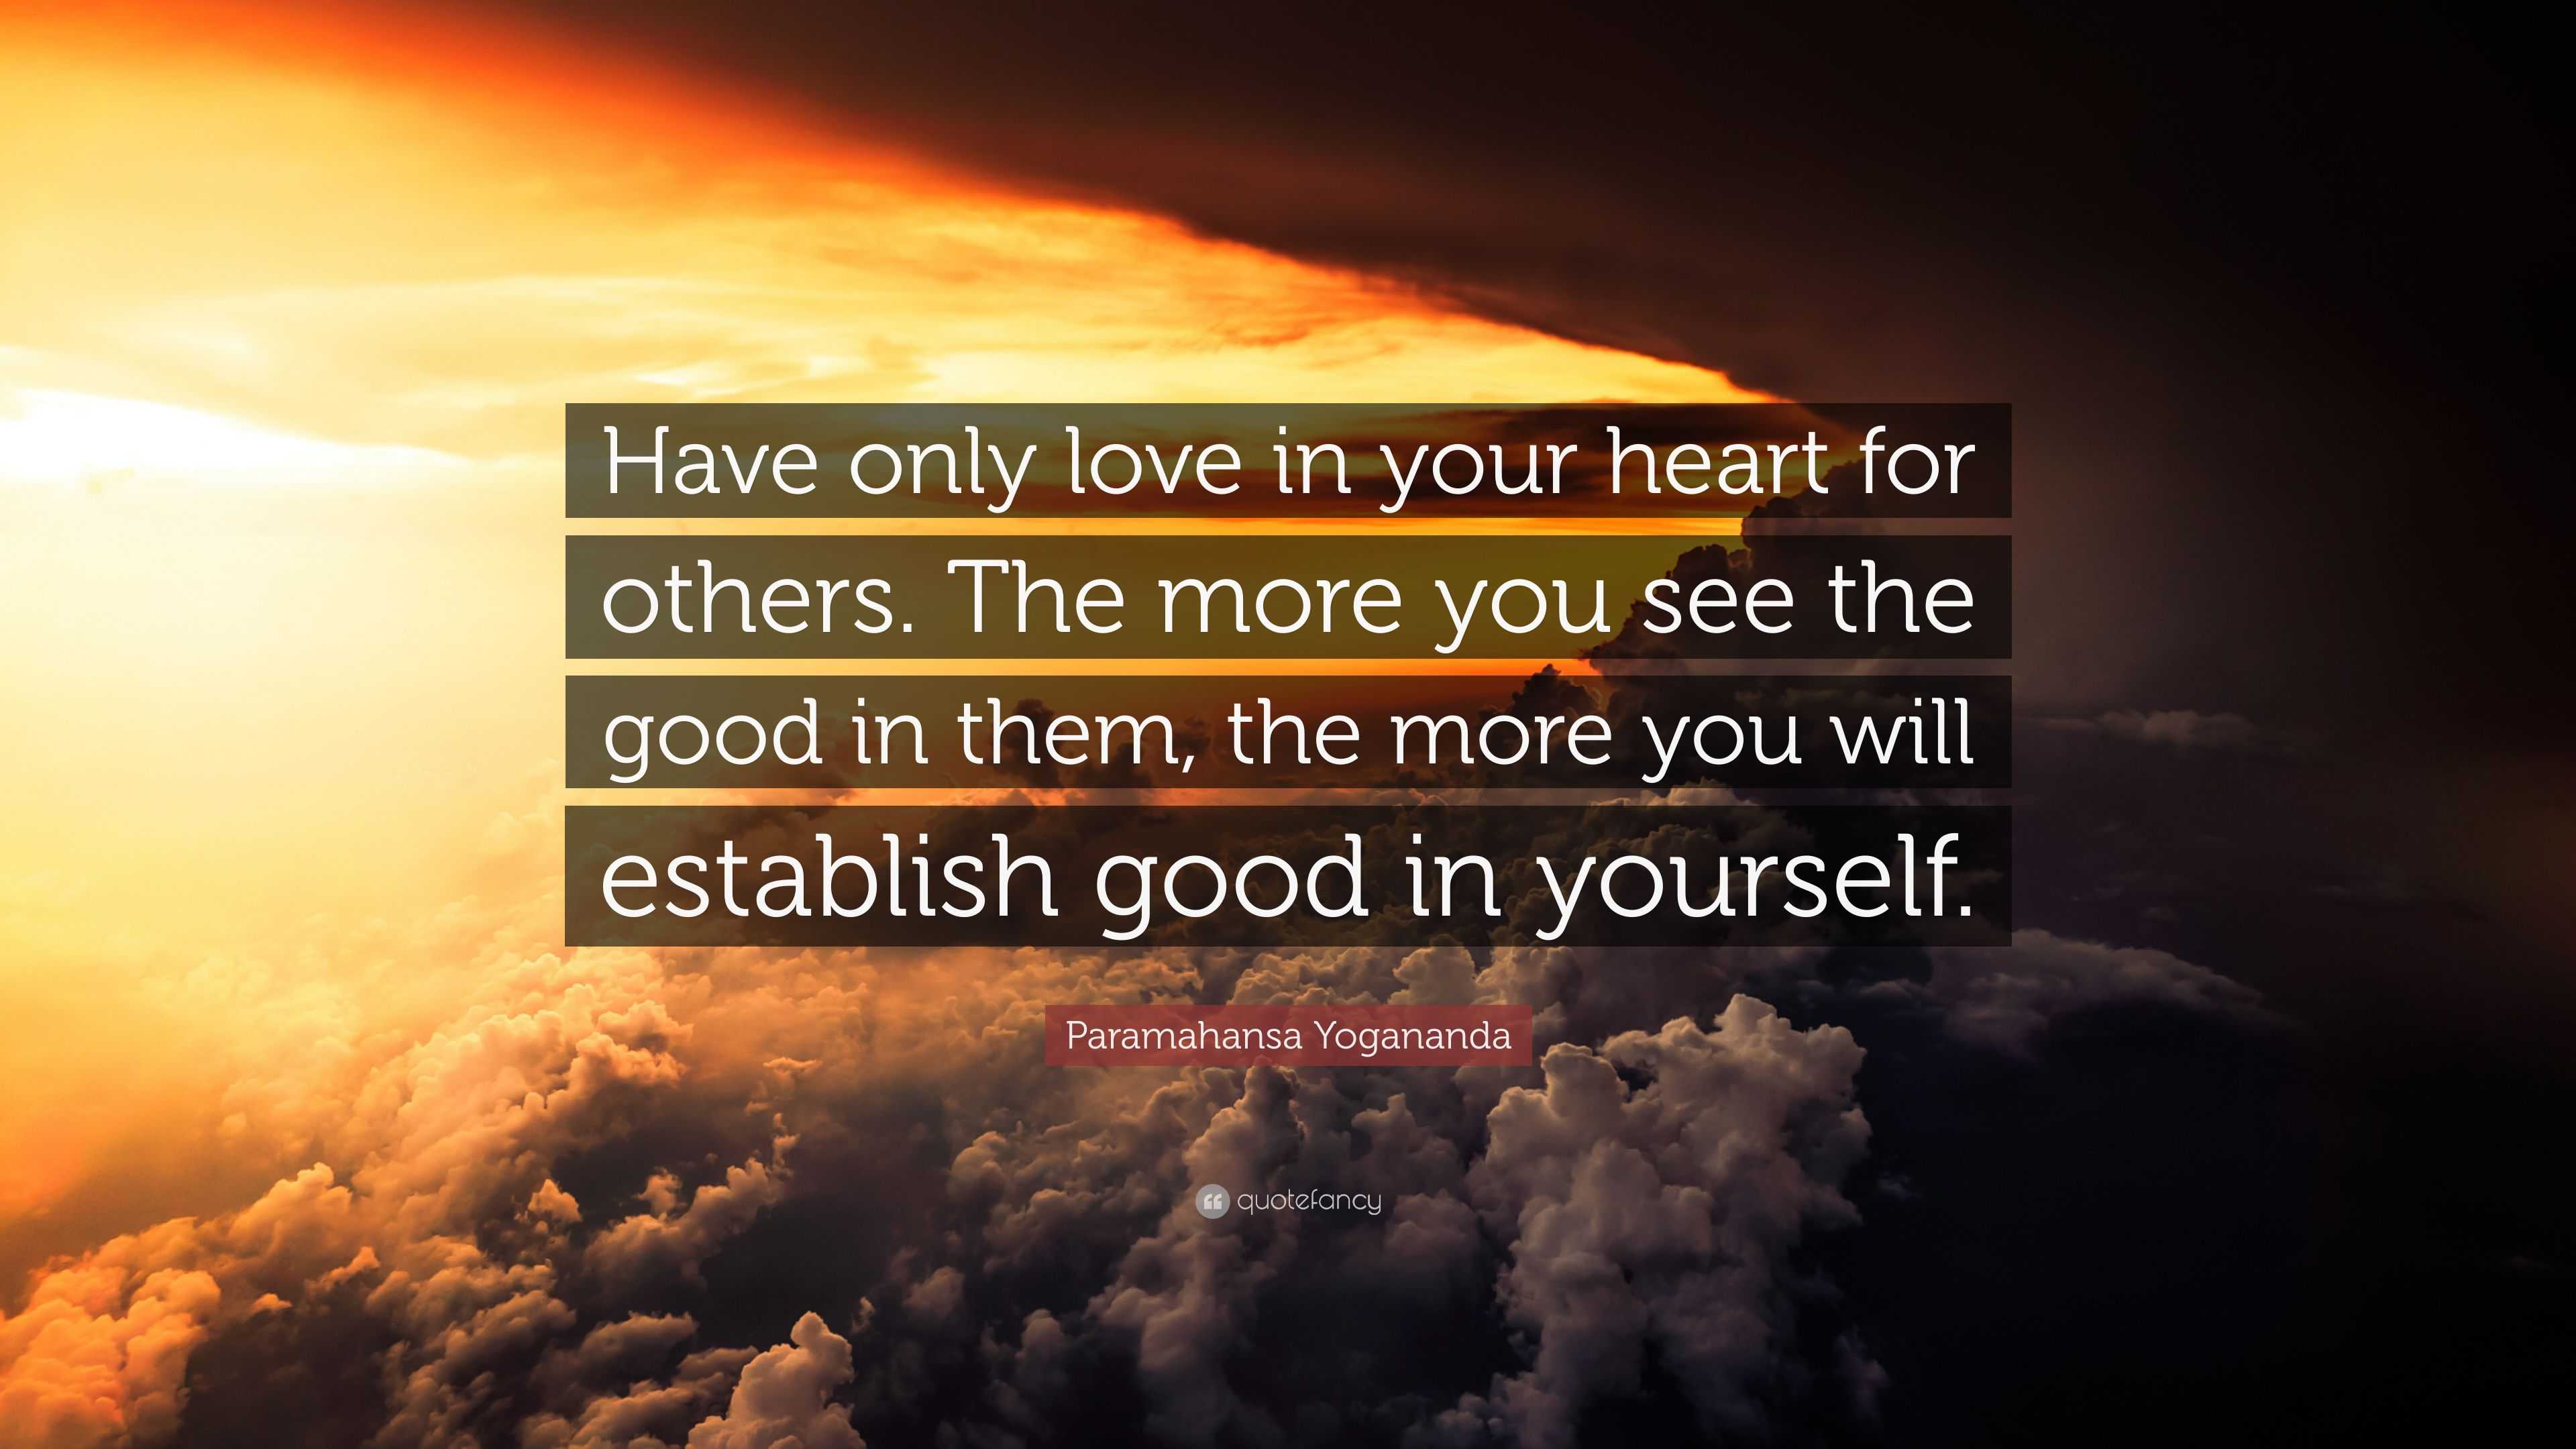 Paramahansa Yogananda Quote: “Have only love in your heart for others ...